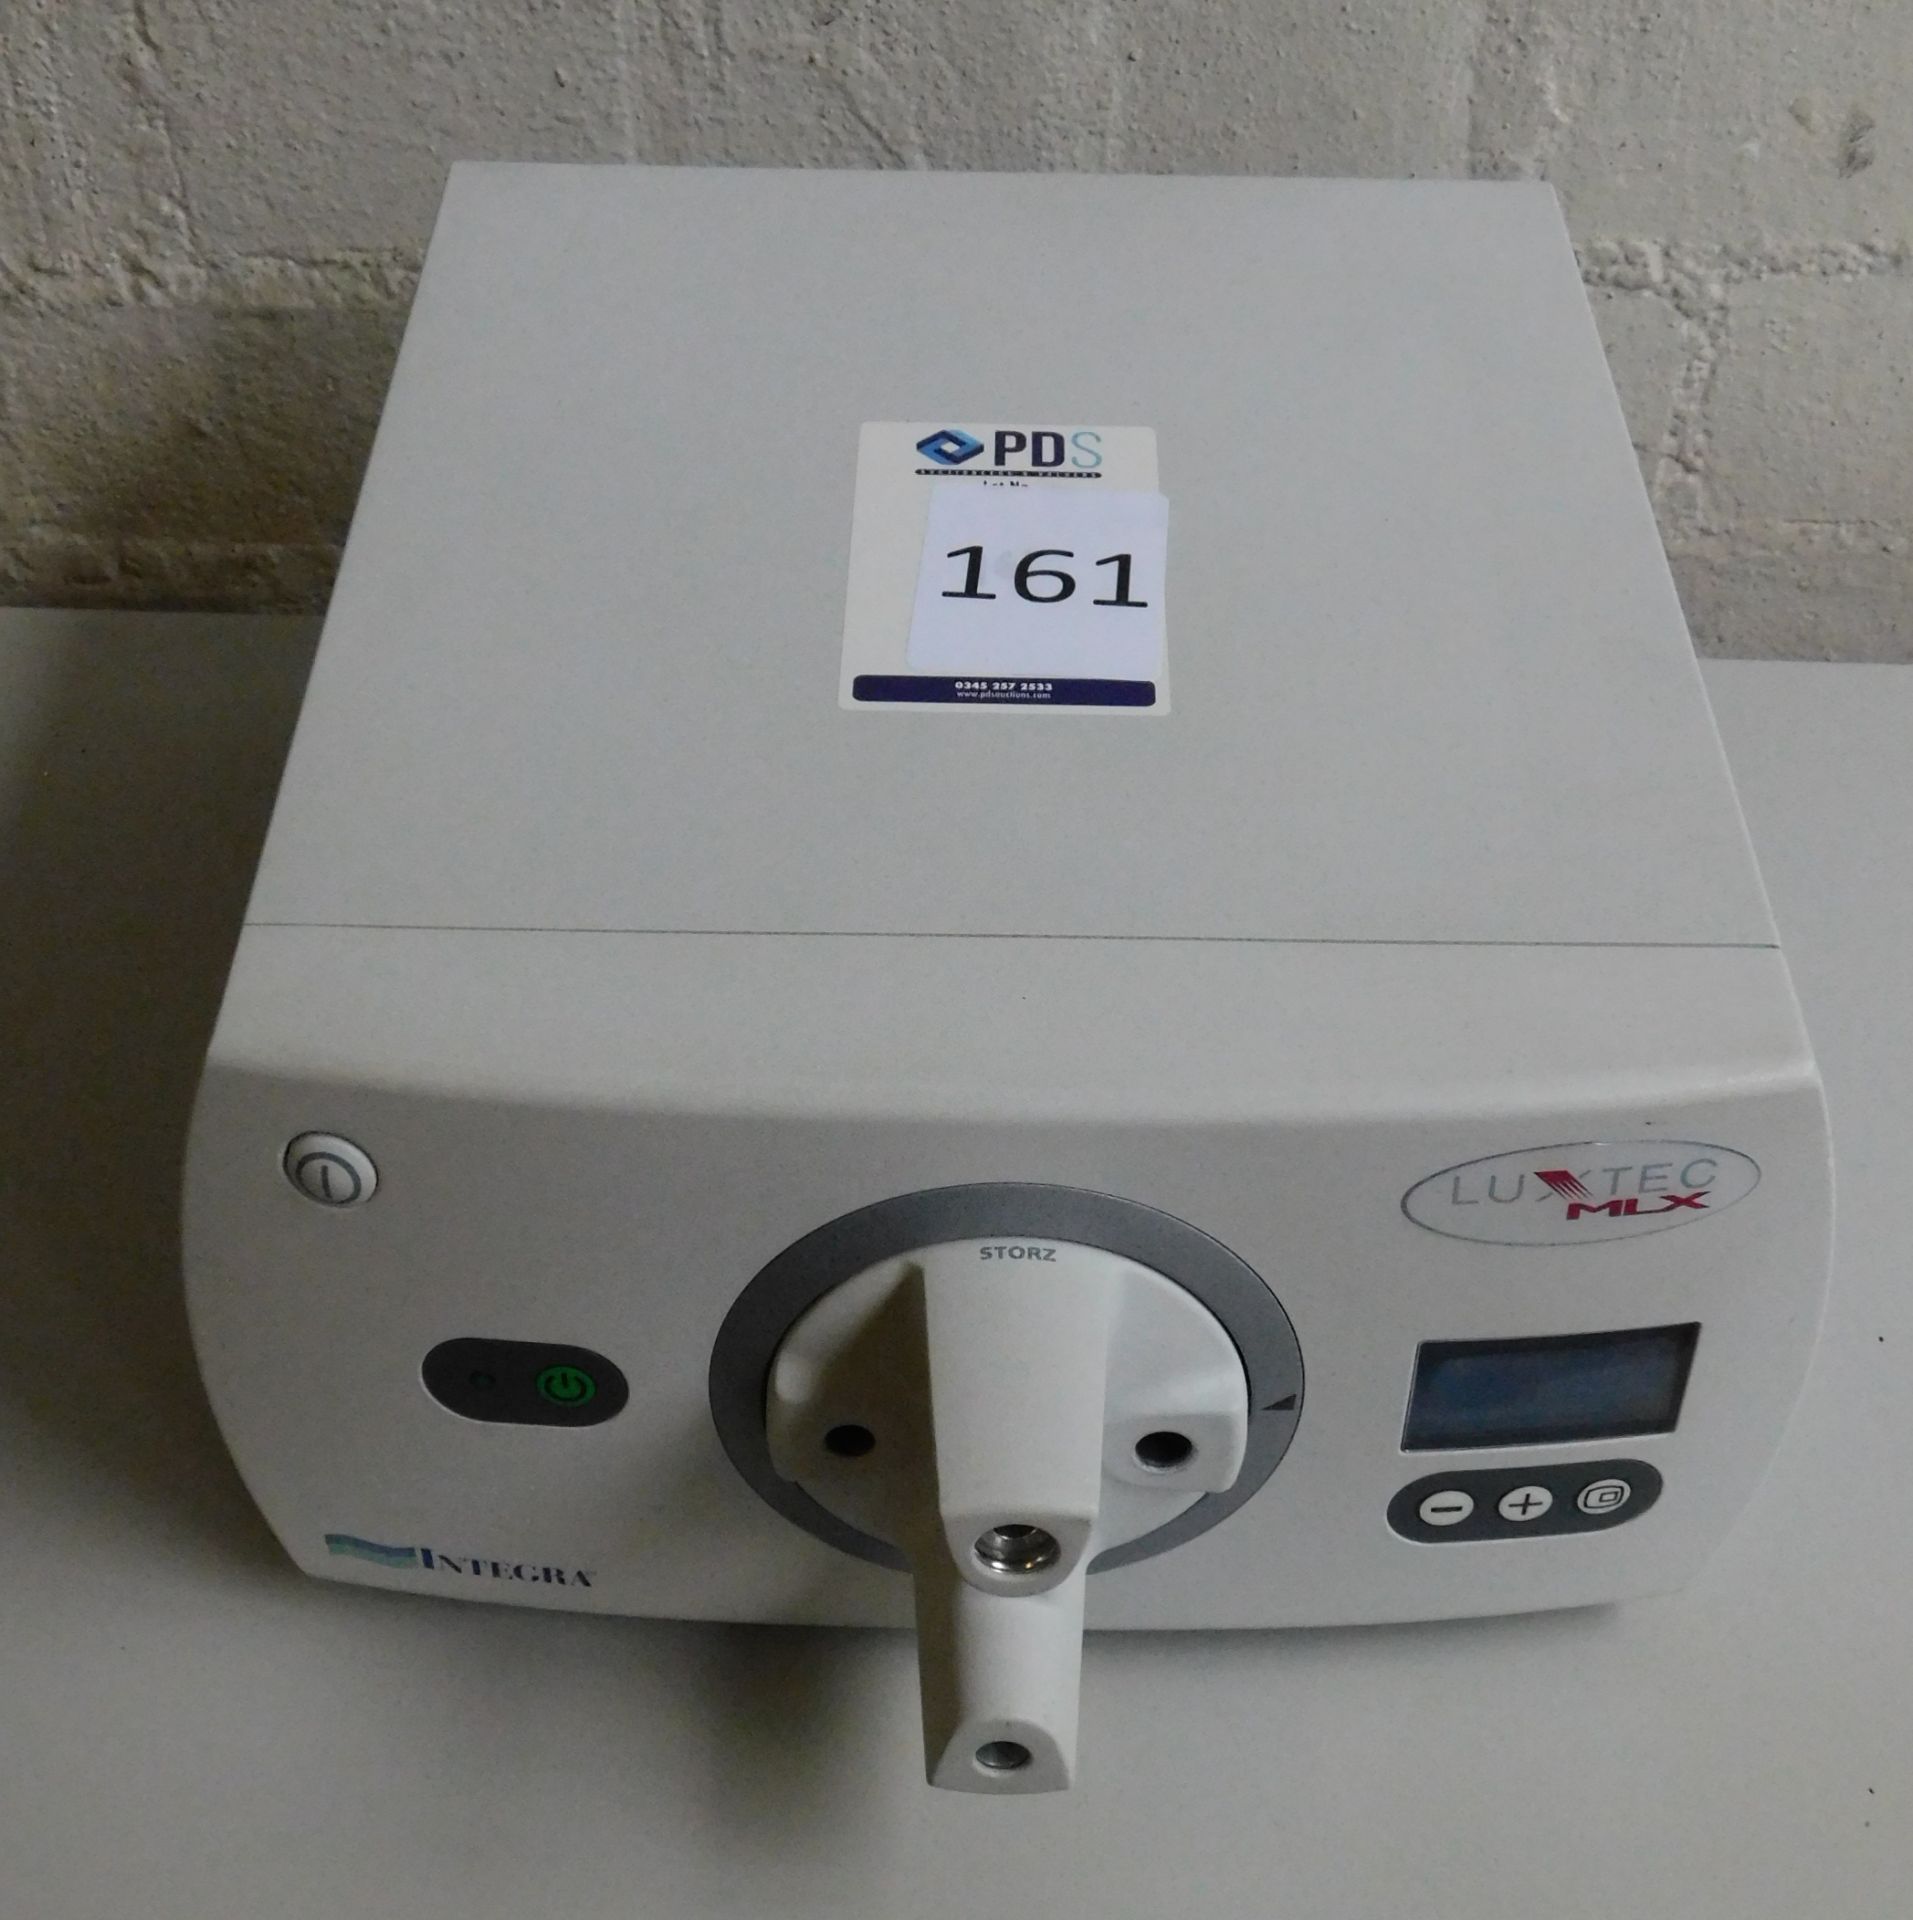 Integra LuxTec 00MLX Surgical Light Source, Serial Number 068610 (Location: Bushey. Please Refer